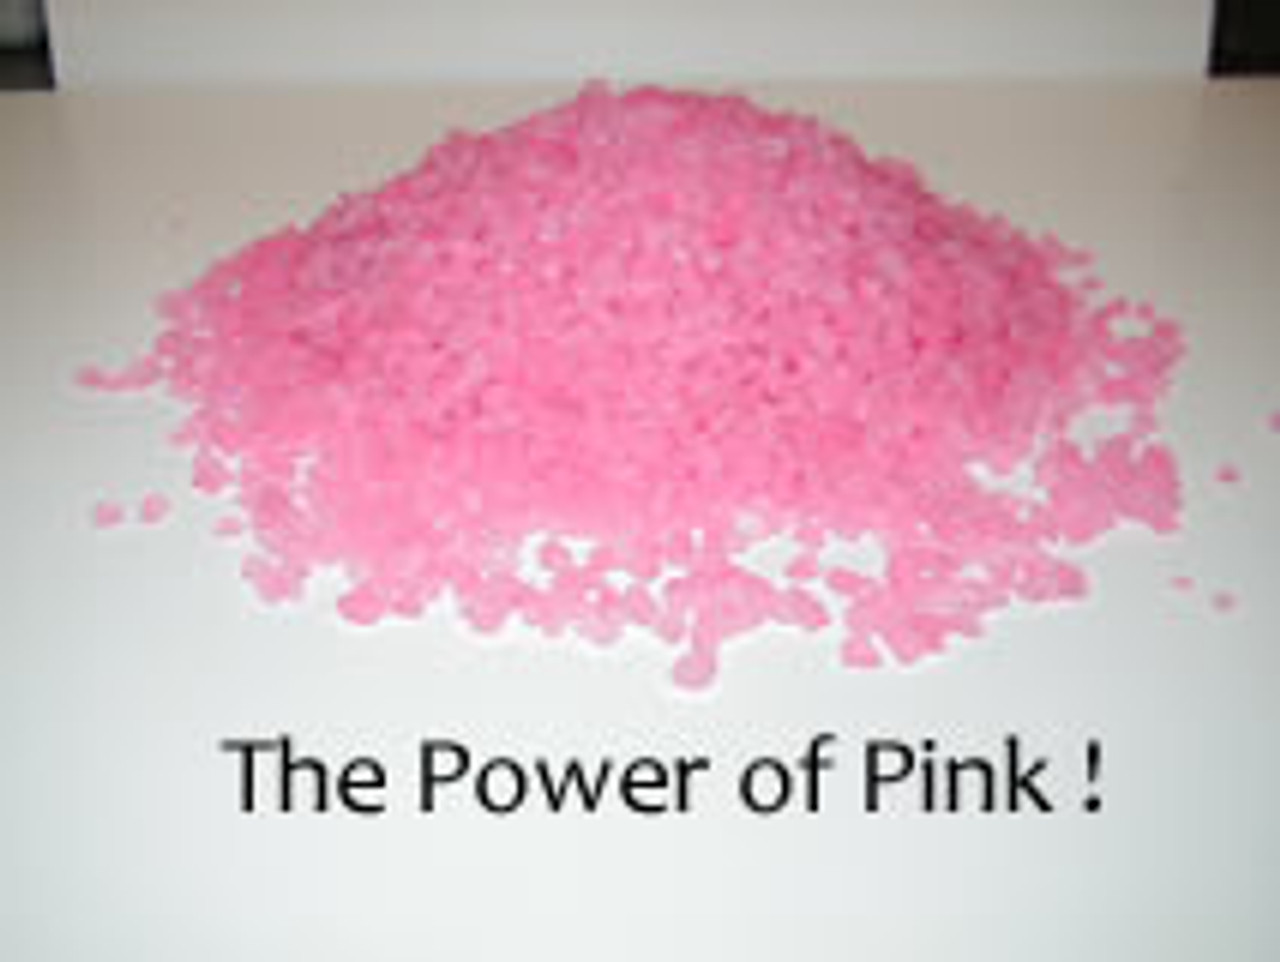 Pink color so you can easily identify where  it is applied.